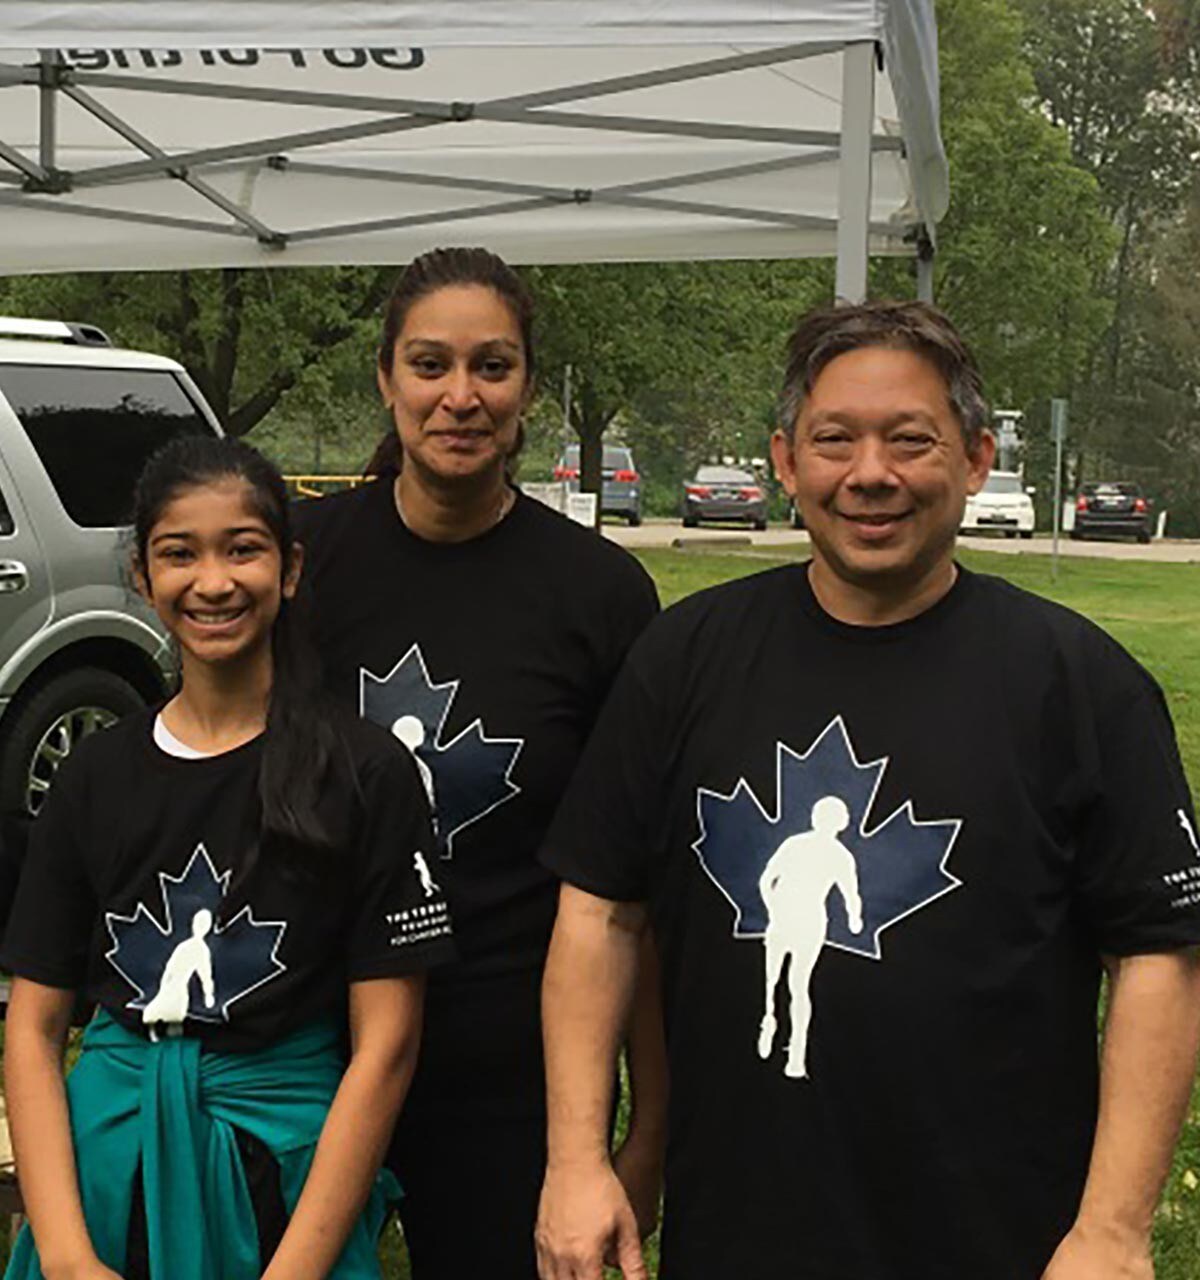 Family attends Ford Terry Fox Run event